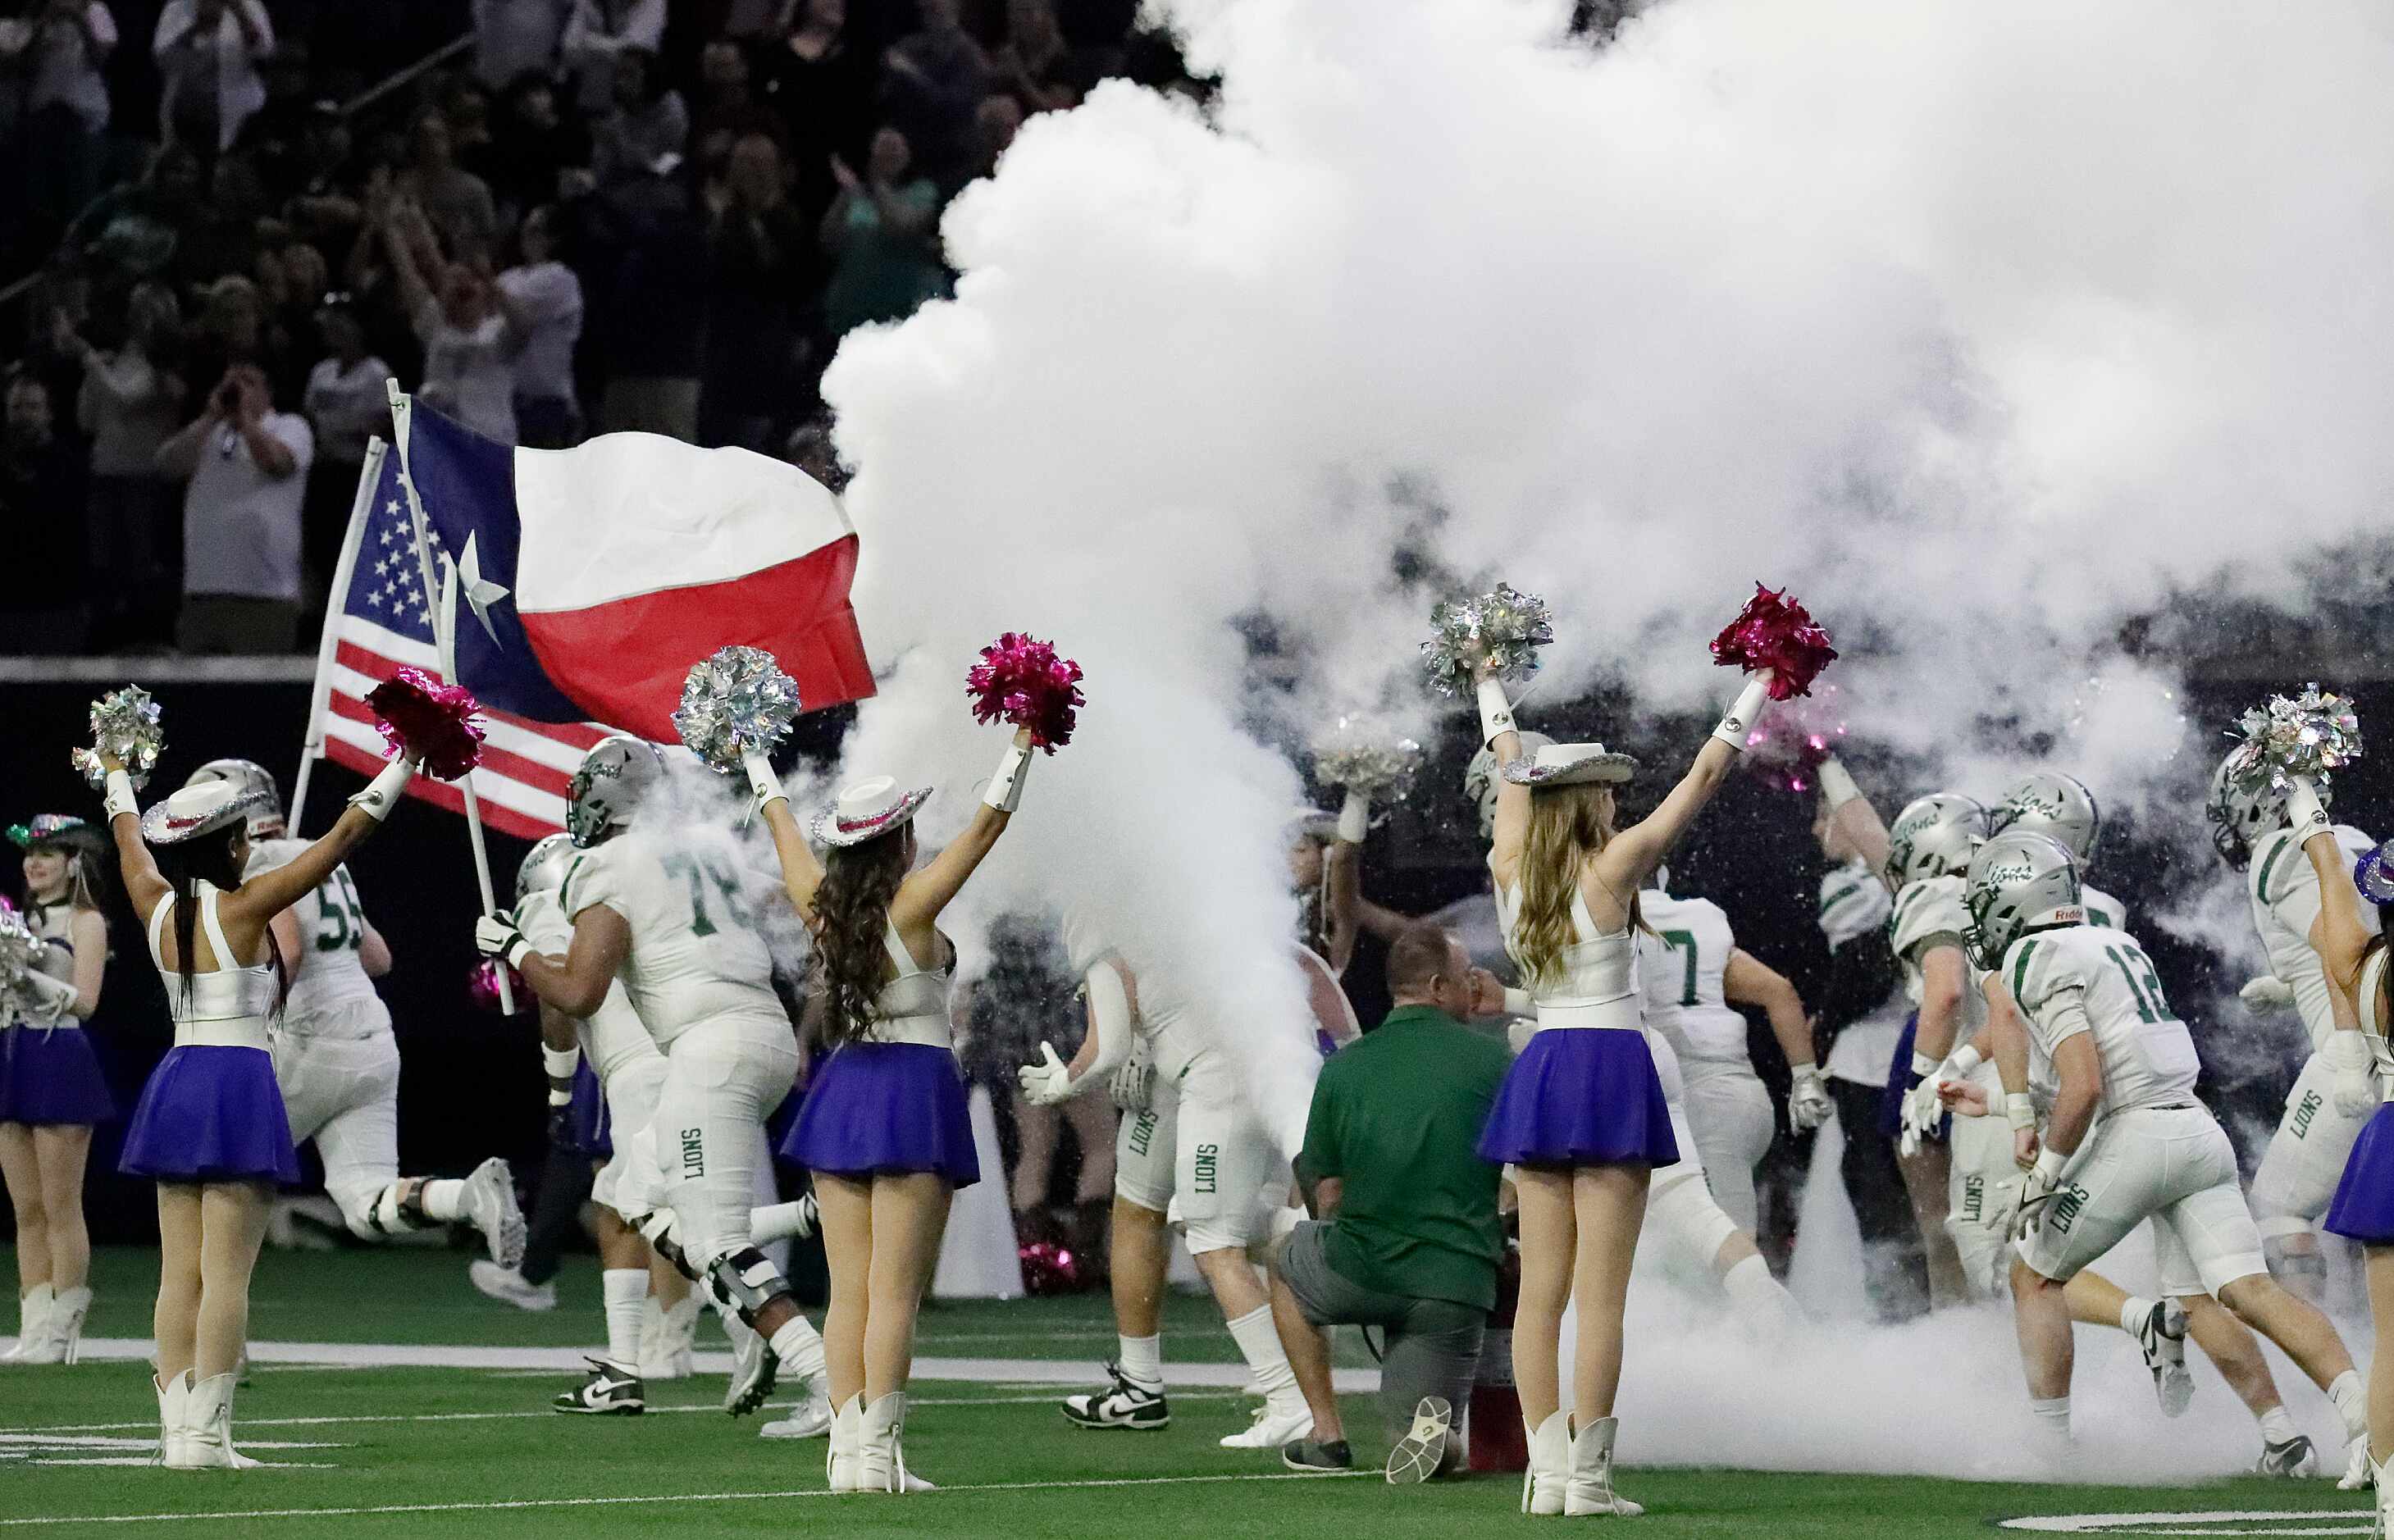 The Reedy High School football team takes the field before kickoff as Reedy High School...